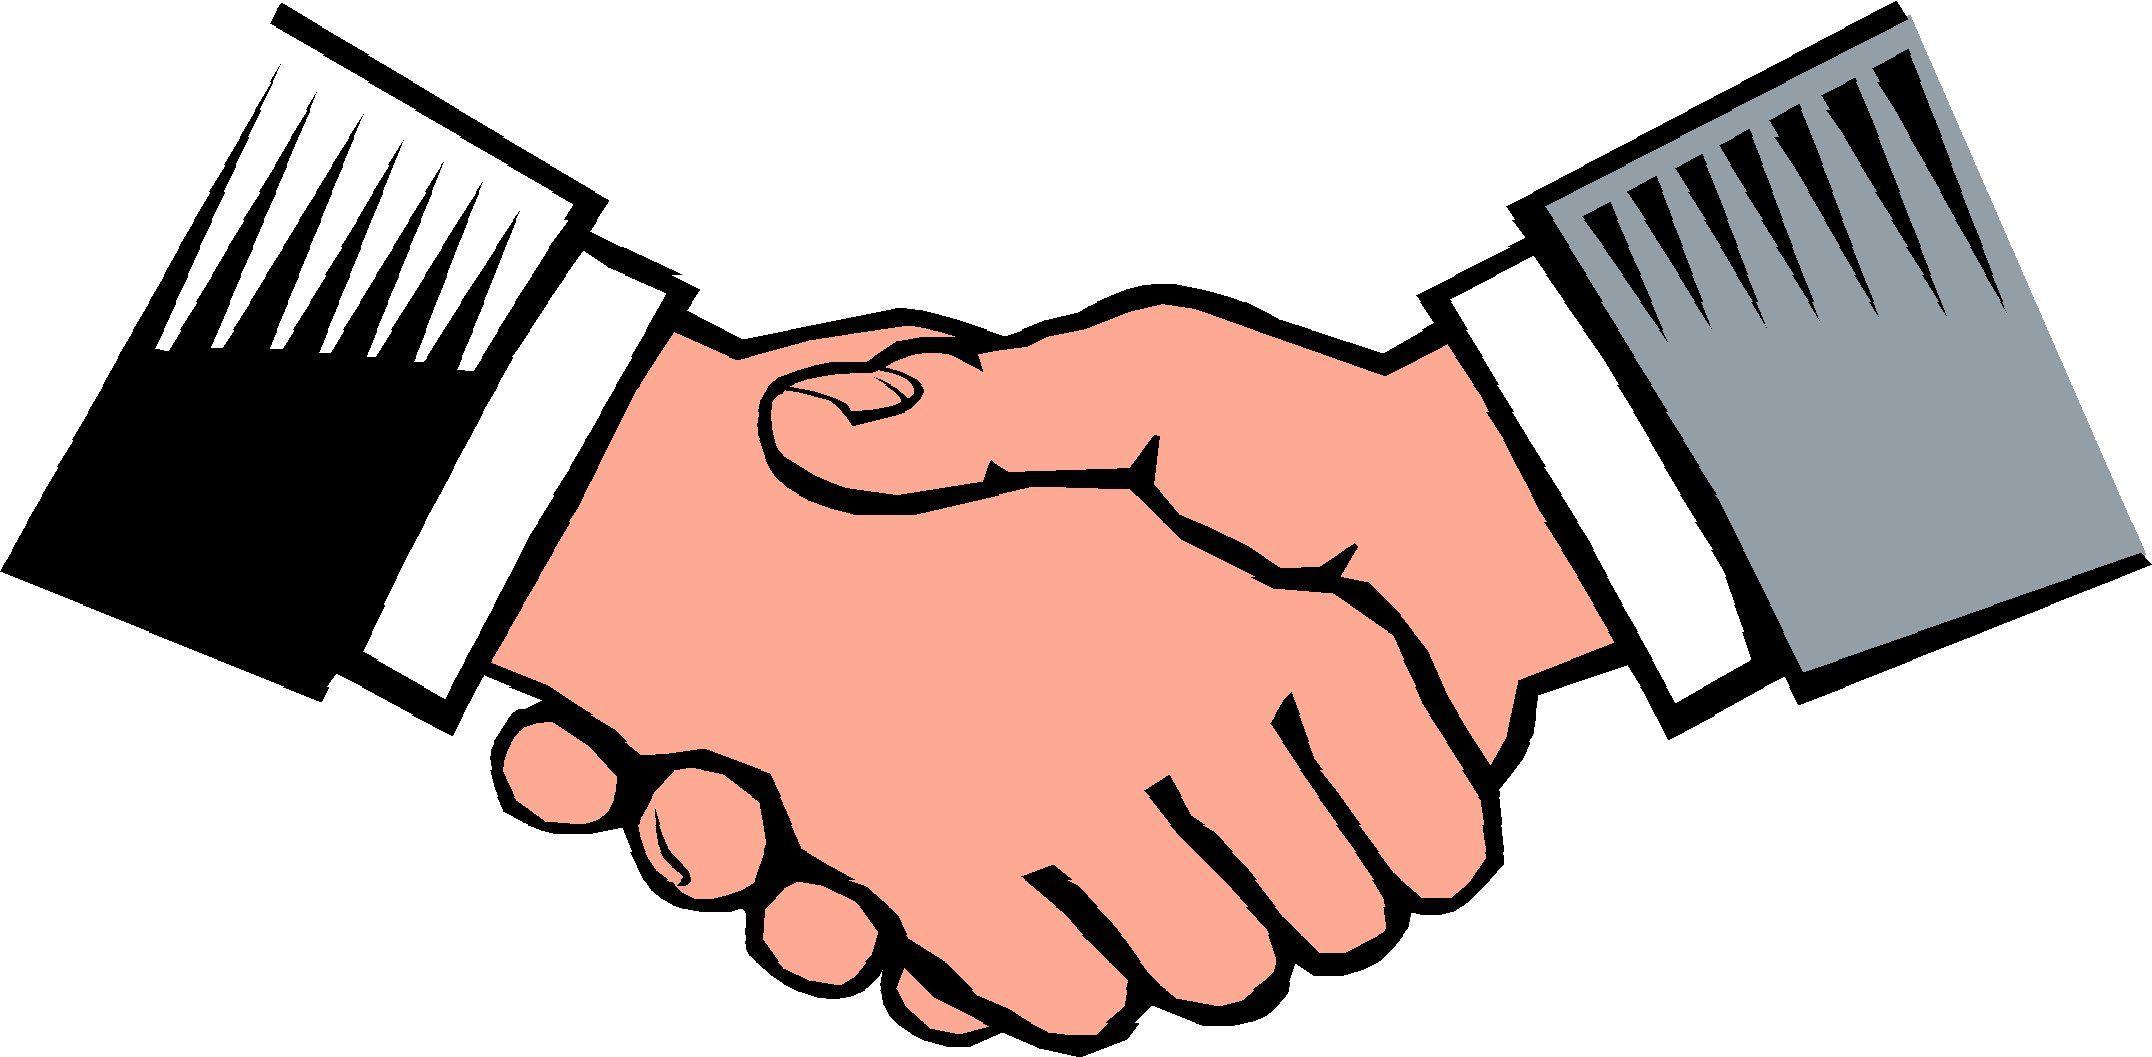 2 Hands Logo - Free Image Shaking Hands, Download Free Clip Art, Free Clip Art on ...